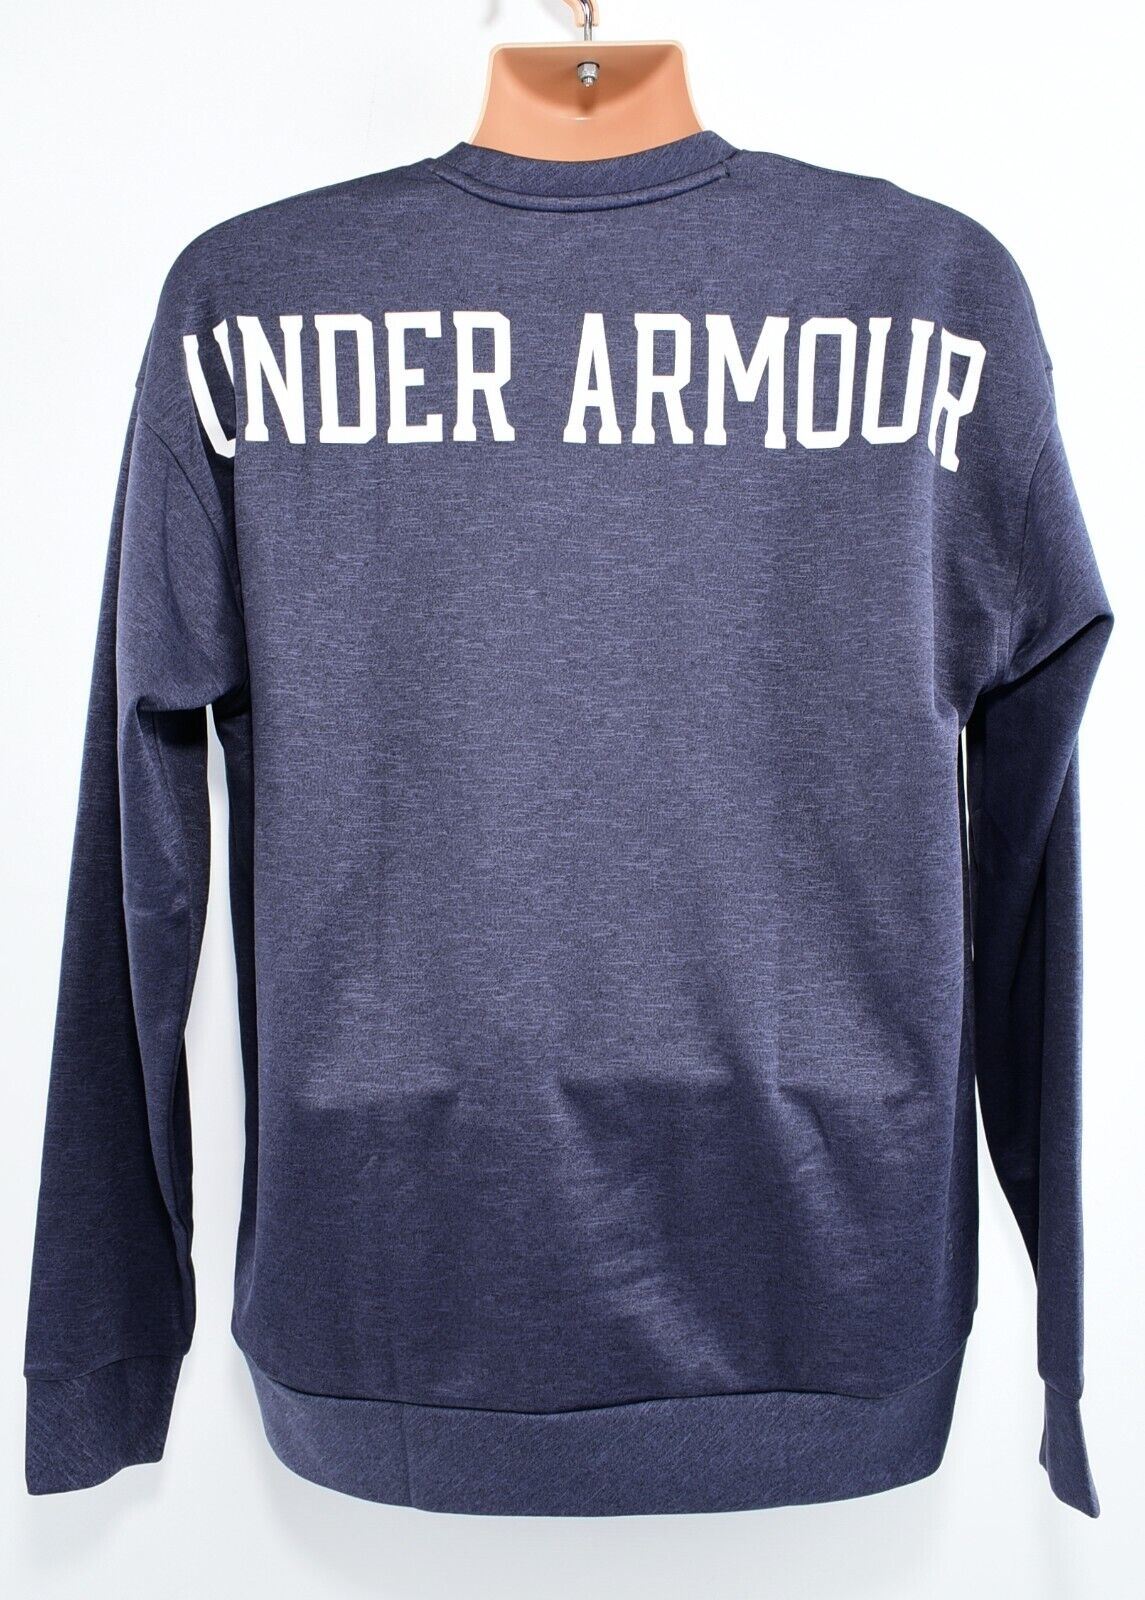 UNDER ARMOUR Recover Mens Long Sleeve Performance Crew Top, Grey, size M